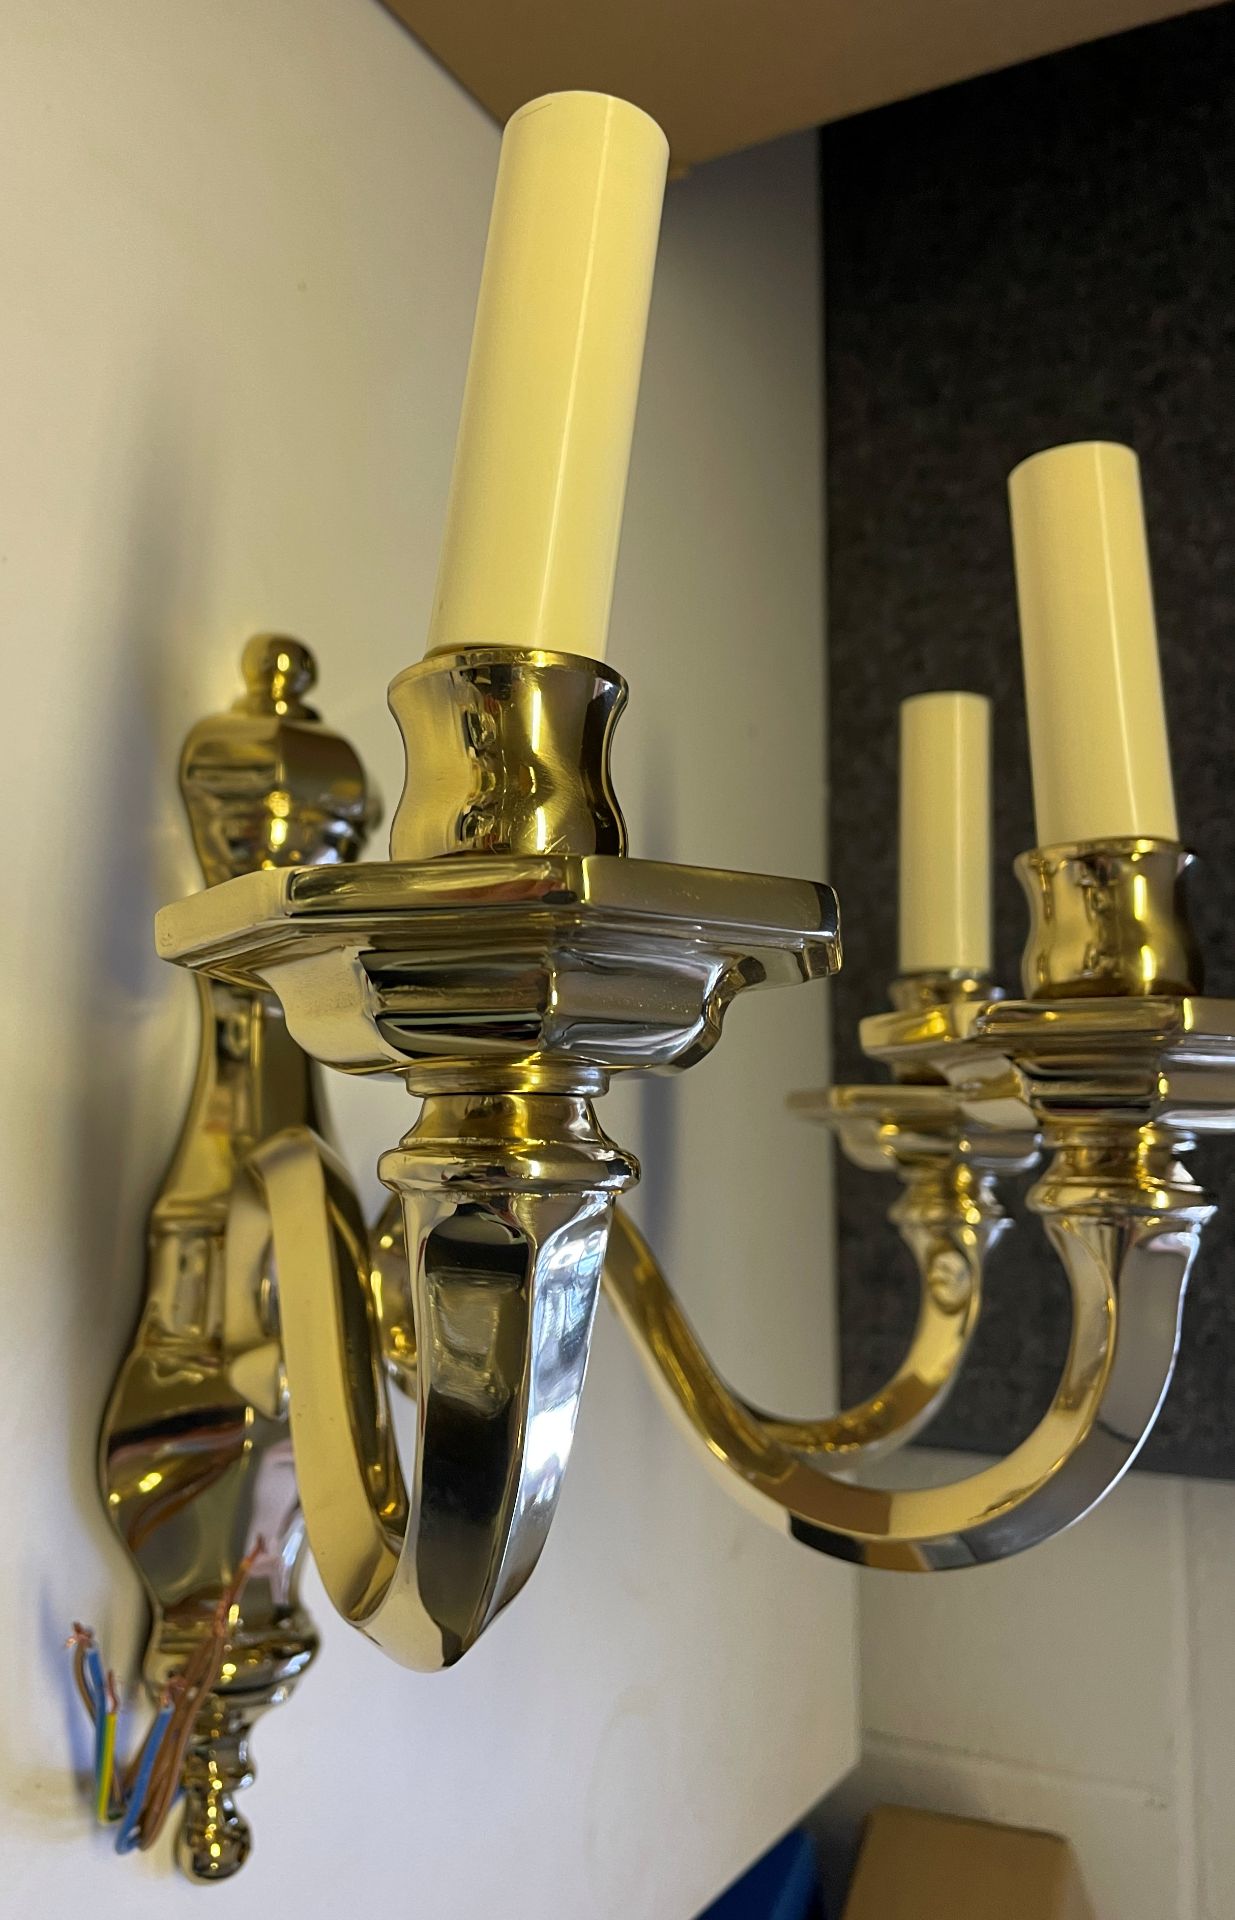 1 x Chelsom Substantial Wall Sconce with 3 Arms - Arm to arm 45cm x Height 34cm - designed exclusive - Image 6 of 12